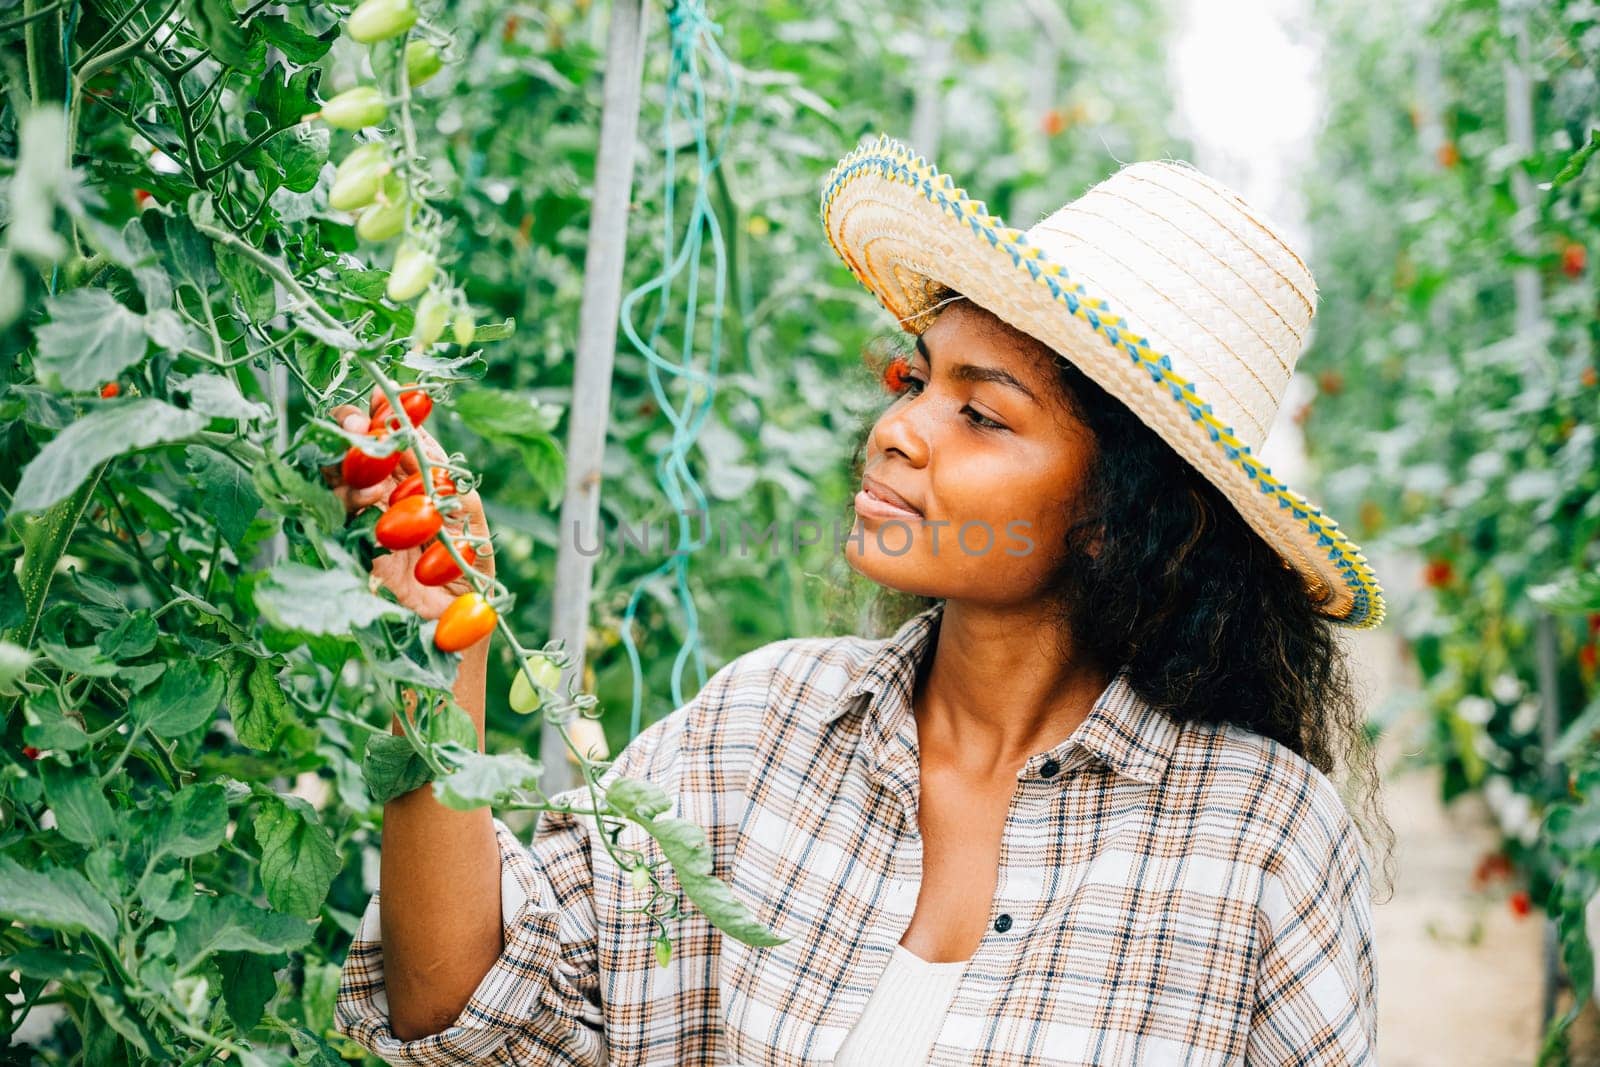 In the greenhouse, a young Black woman farmer holds a digital tablet, inspecting and controlling tomato quality. Smart farming concept with the owner smiling and examining vegetables.